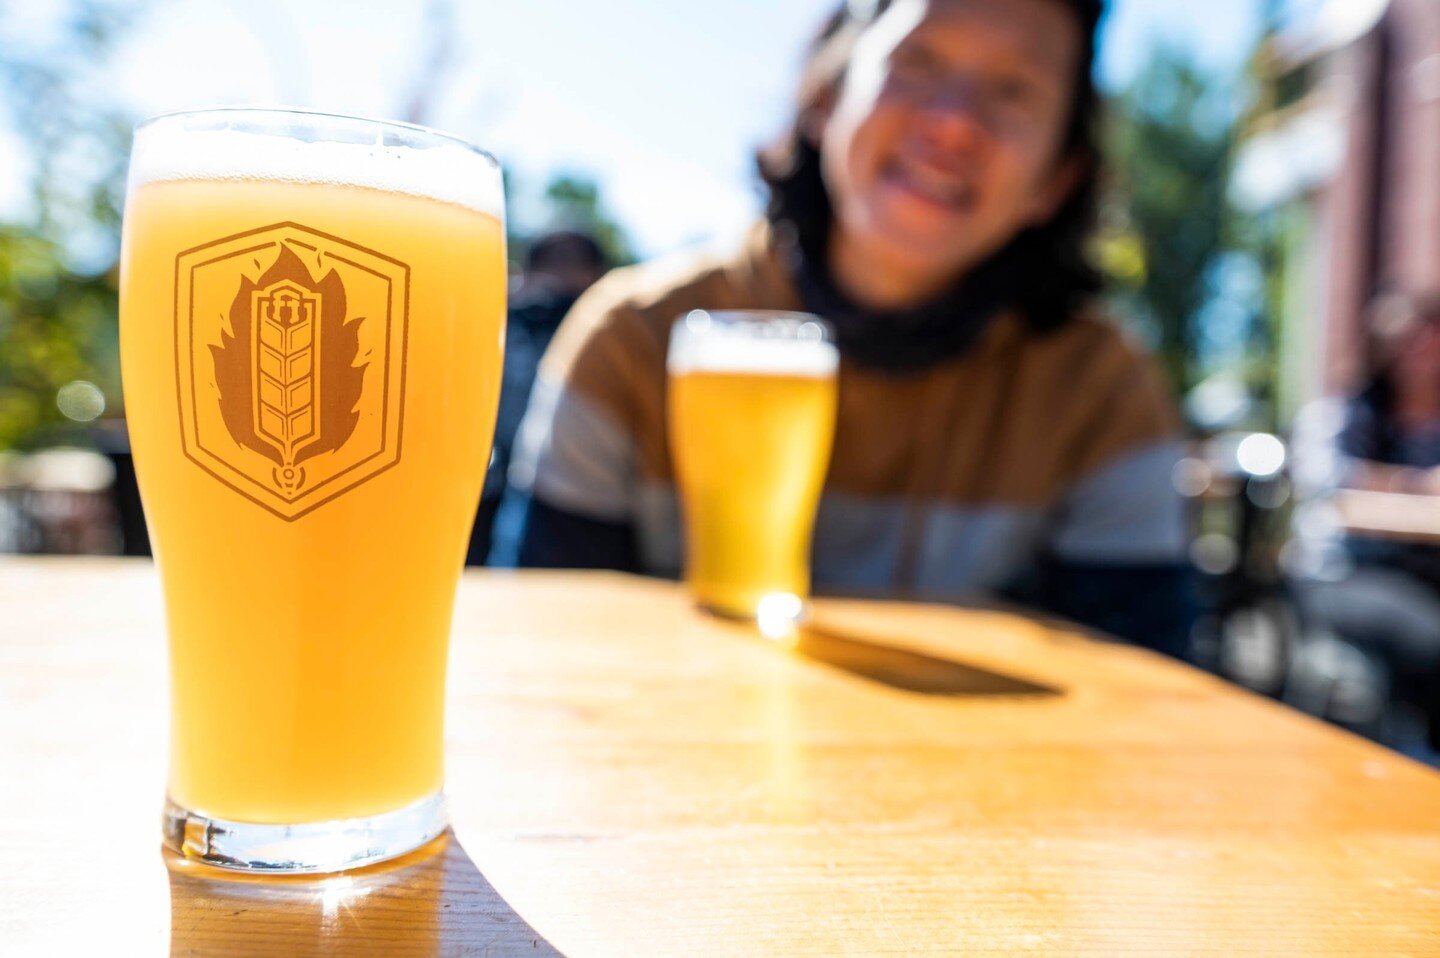 On tap: cold beer, red bricks, and warm rays (while supplies last!)⁠
⁠
⁠
⁠
⁠
⁠
⁠
#fhkt2022 #heritage #beer #foodie #yummy #tasty #eatlocal #drinklocal #gourmet #restaurant #pub #explore #local #madelocal #craft #craftbeer #burgers #ilovefood #ipa #po